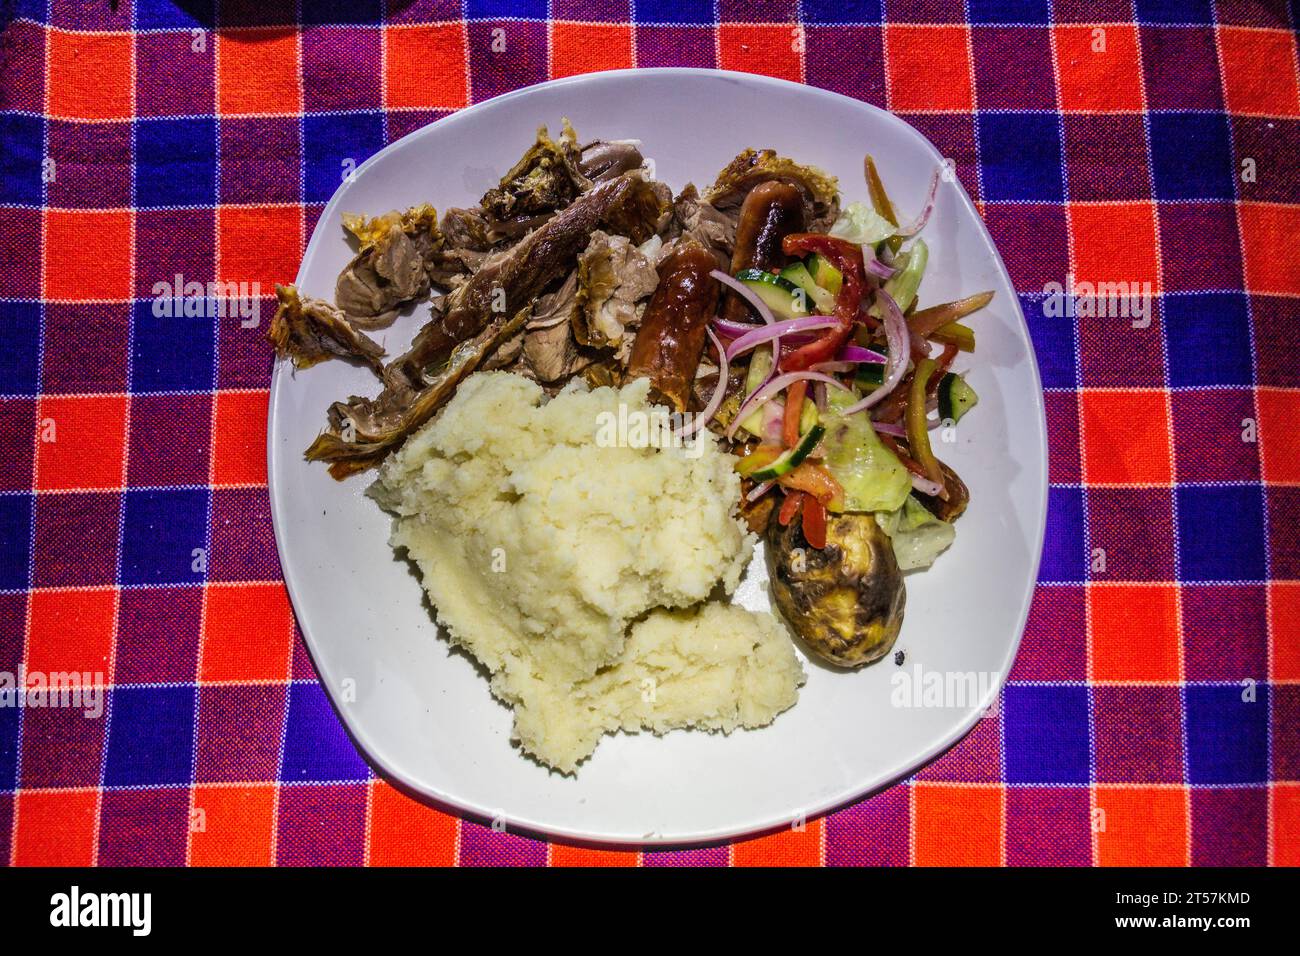 Meal prepared by Masai in Kenya - roasted goat meat, sausages, salad and ugali. Stock Photo